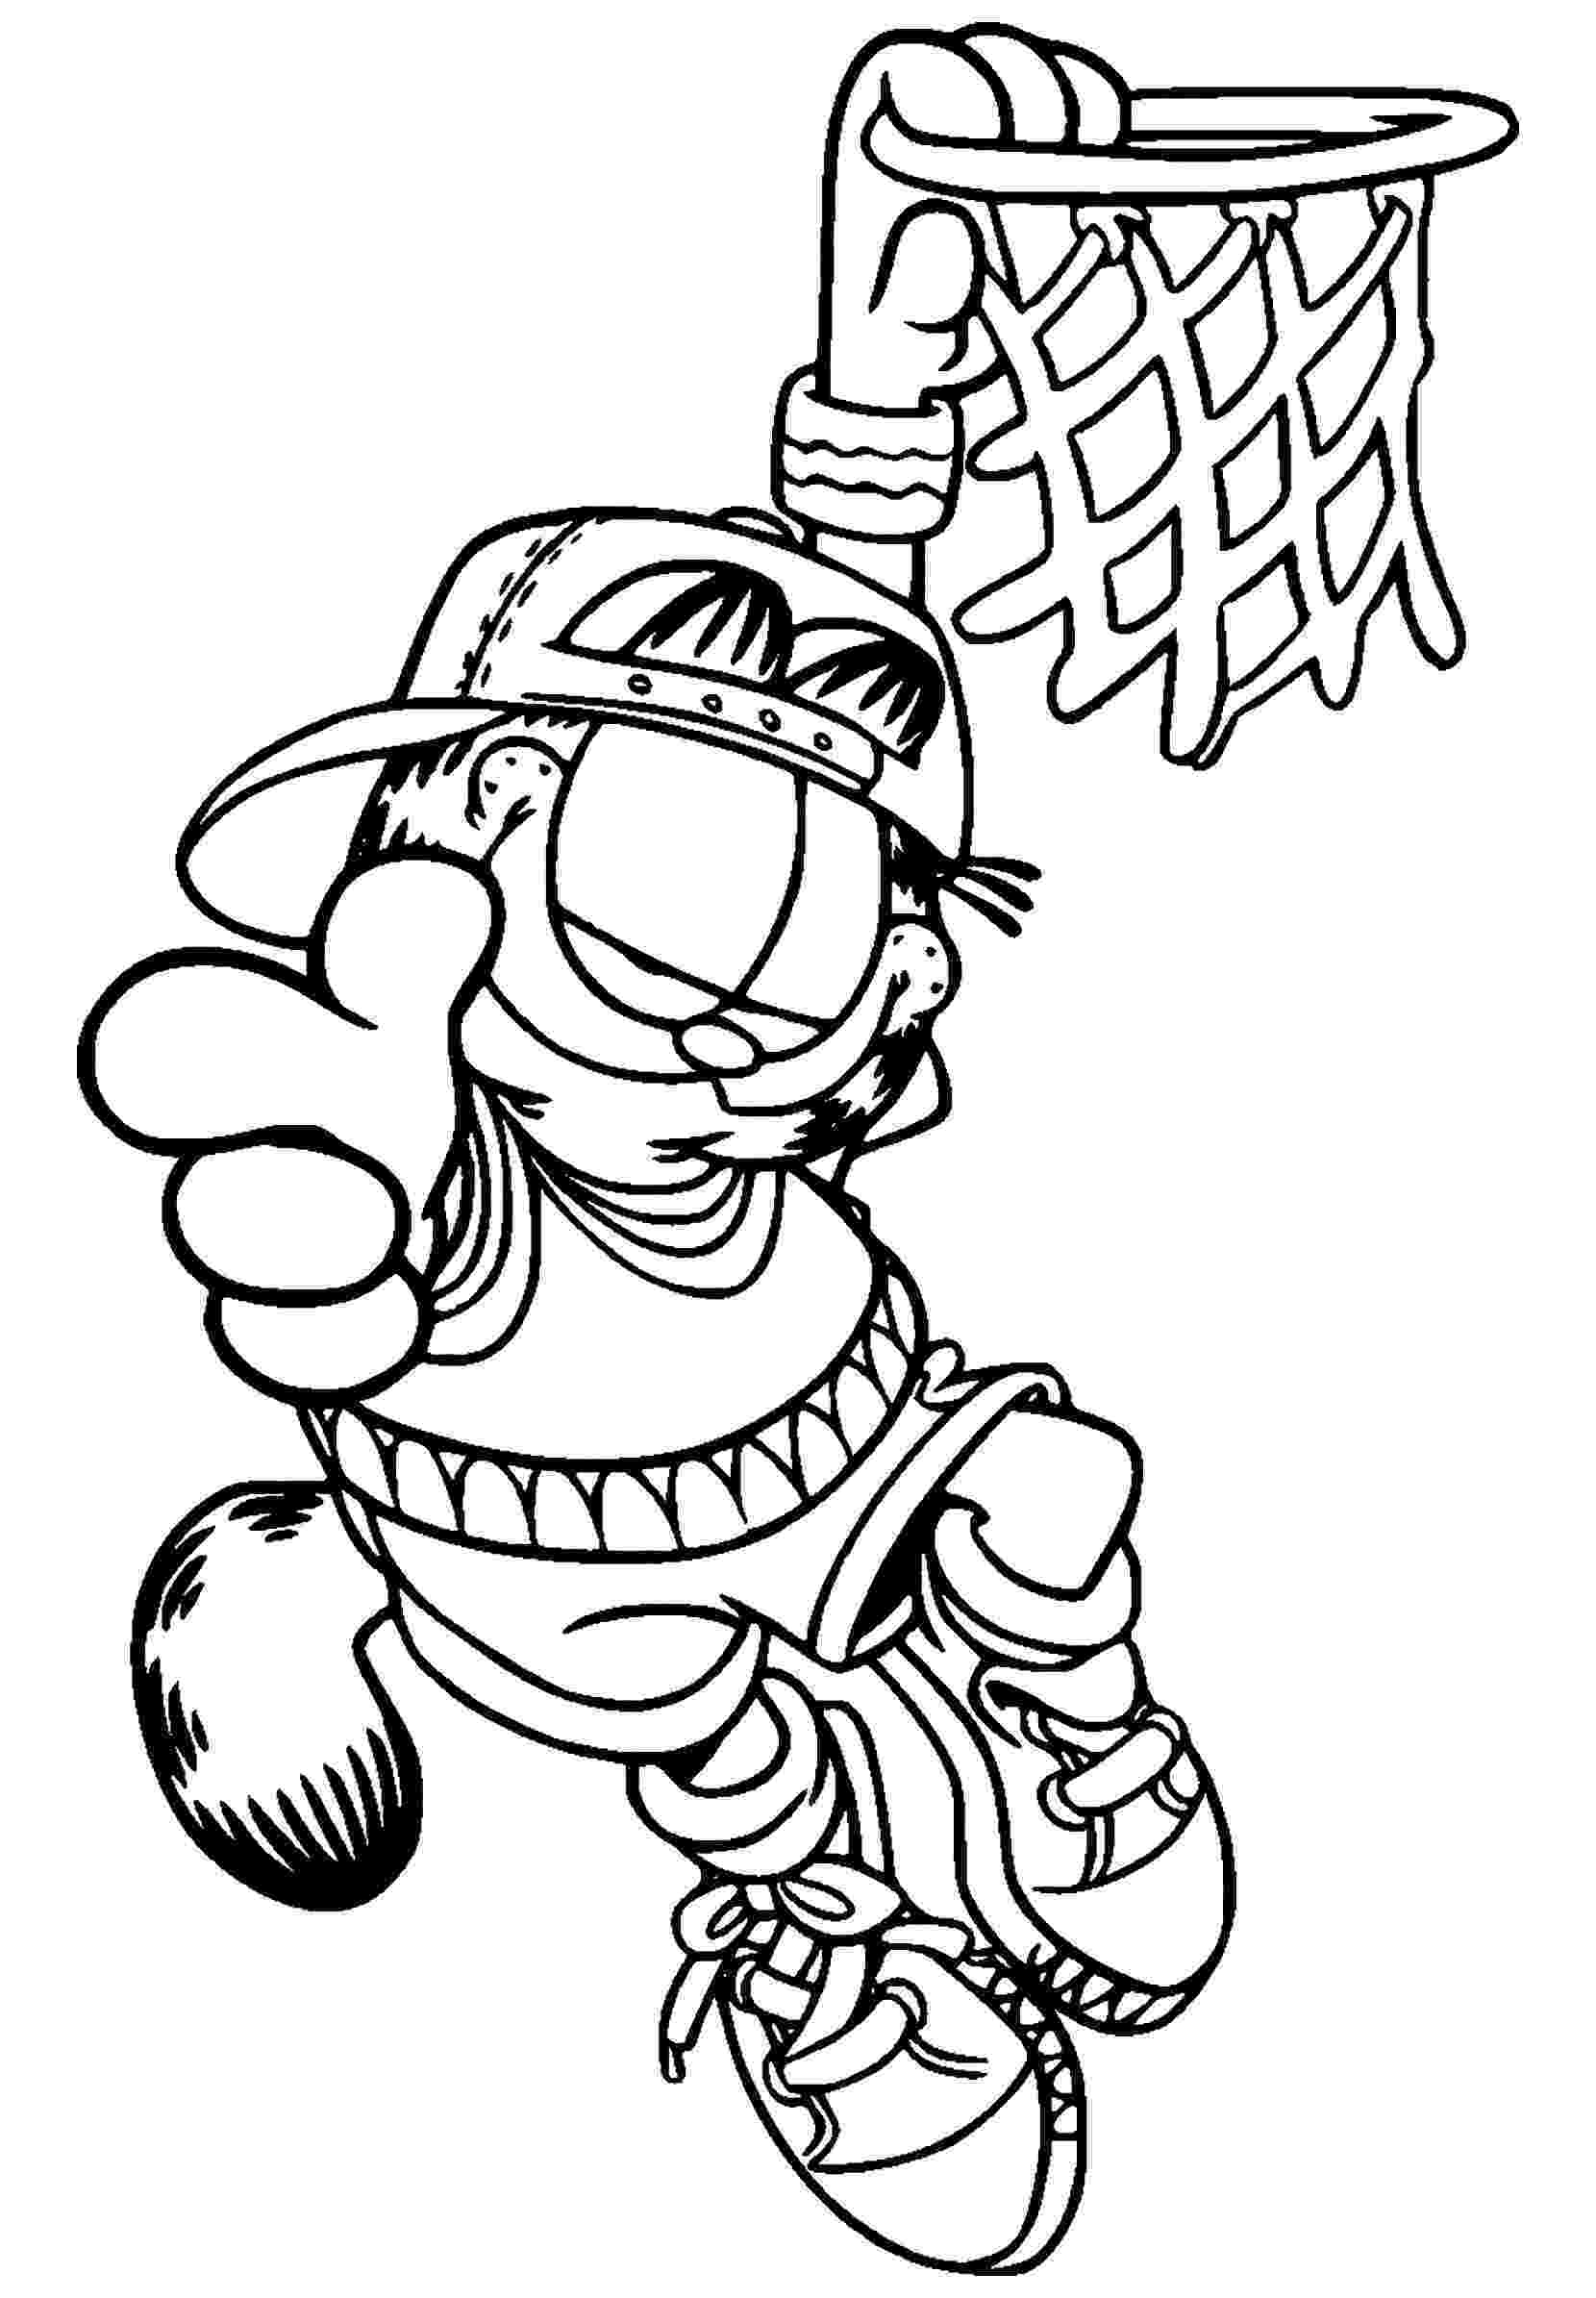 garfield colouring pages garfield coloring pages minister coloring garfield colouring pages 